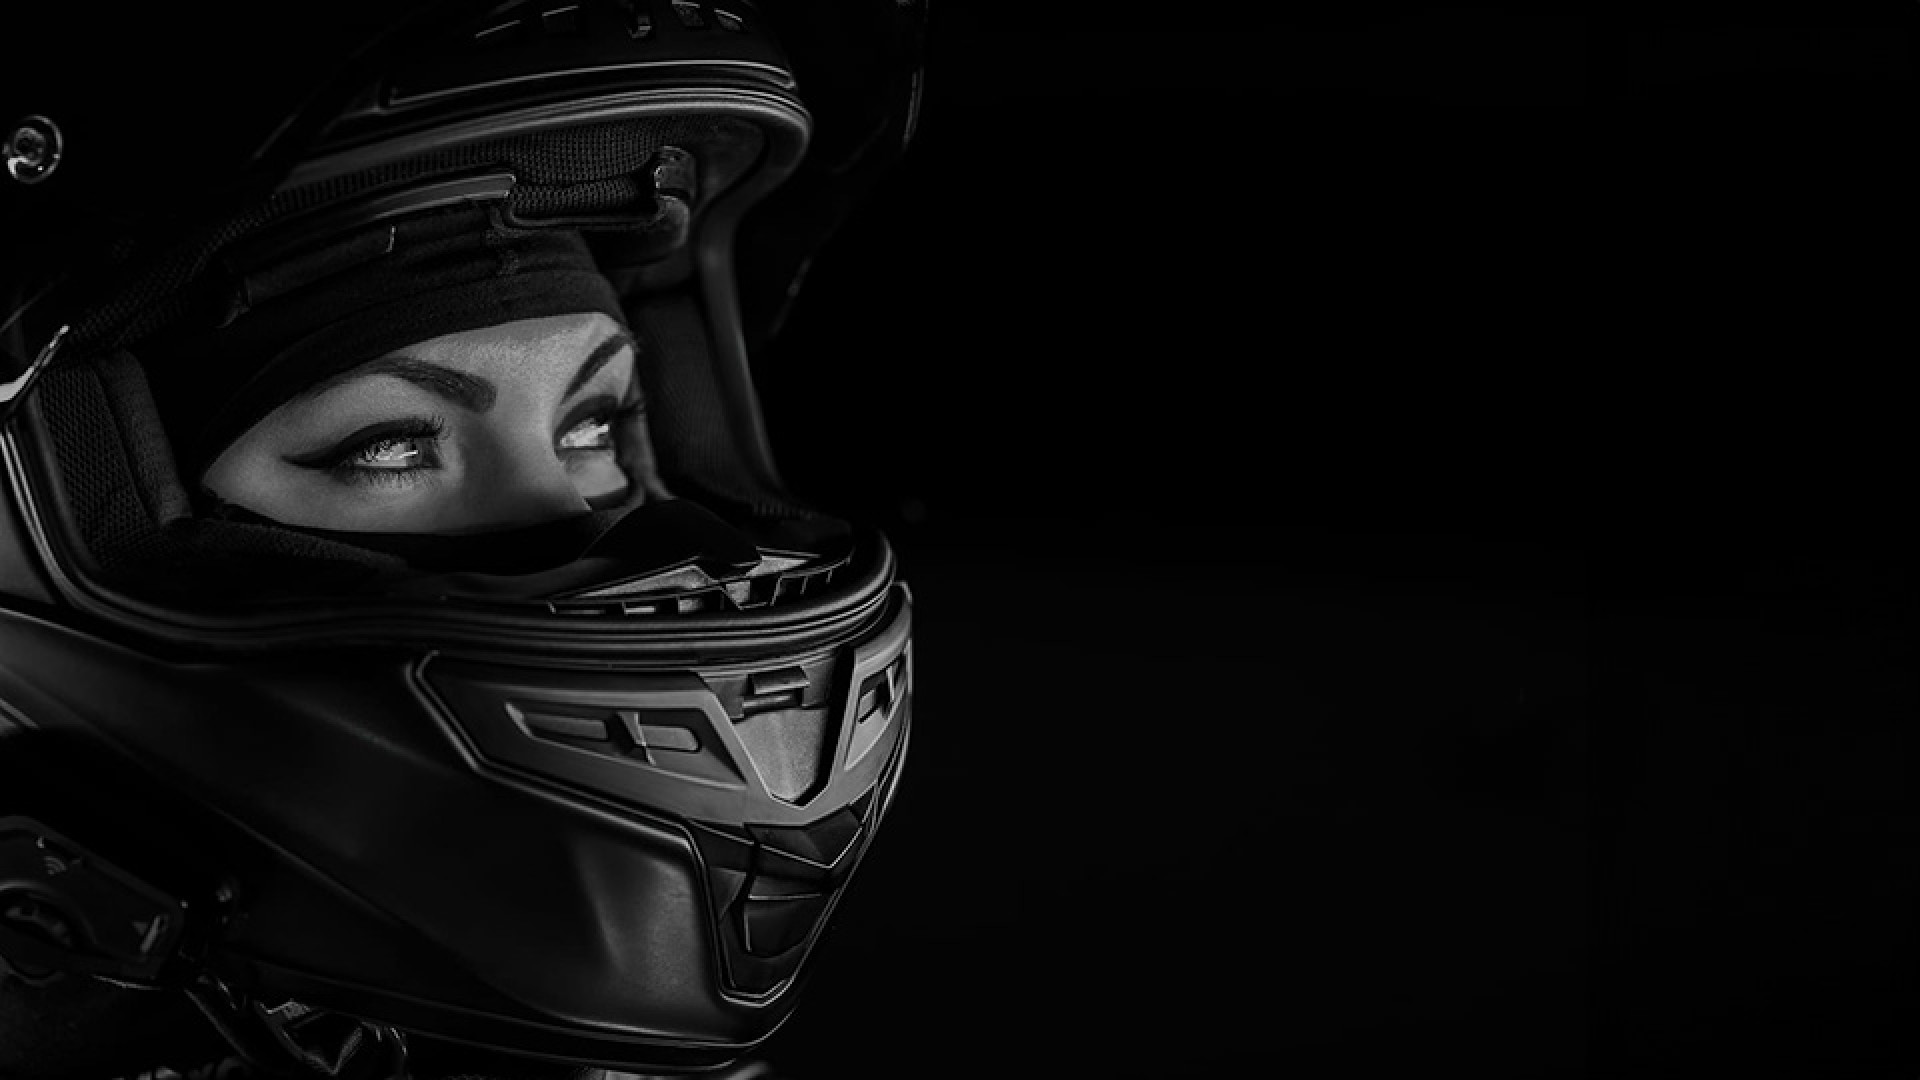 https://www.raceleathers.co.uk/image/cache/catalog/Blog%20Images/Is%20it%20Better%20to%20Have%20a%20Tight%20or%20Loose%20Helmet-1920x1080.jpg